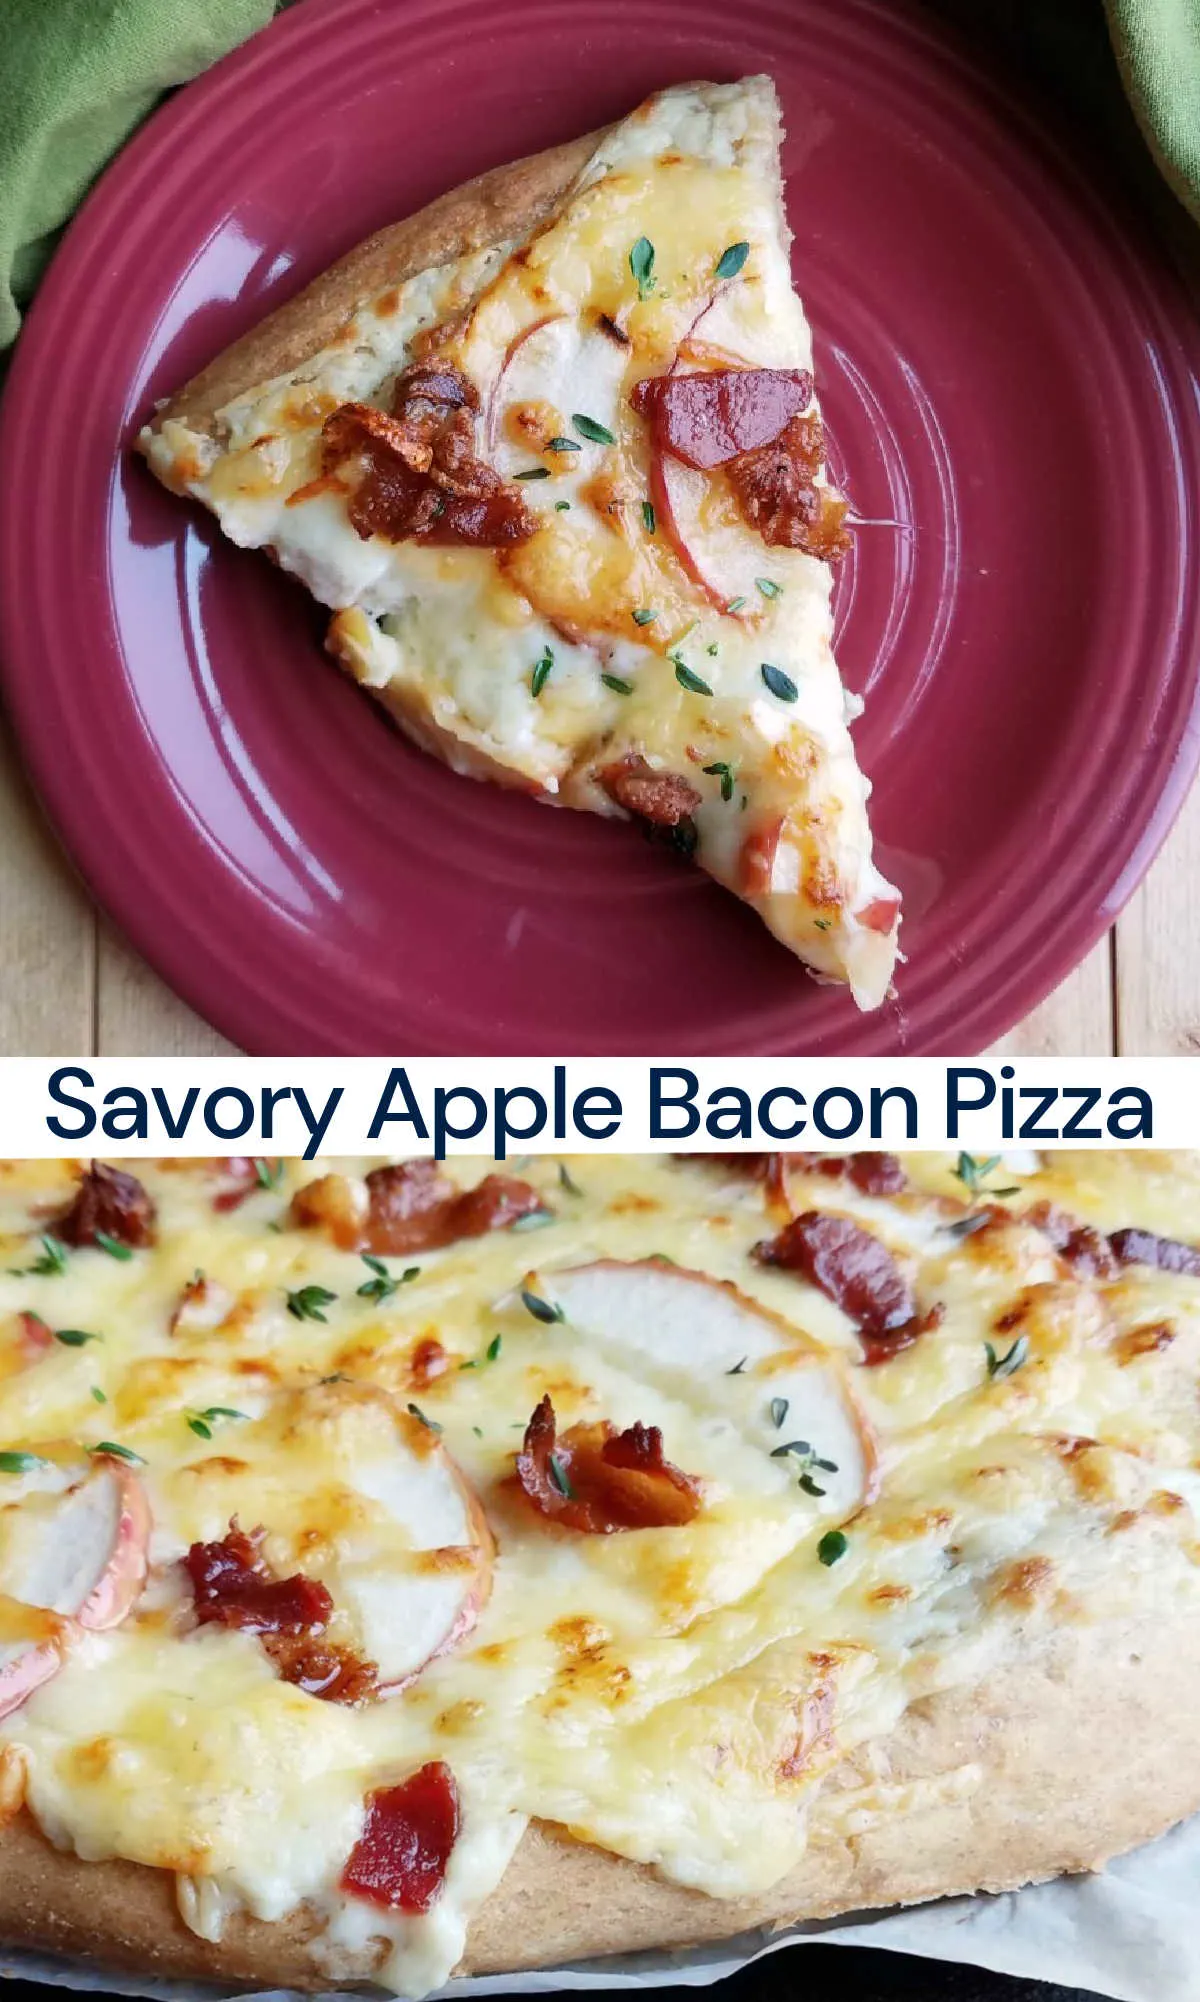 This pizza is loaded with delicious gooey cheese, bacon, apples and thyme. You will not believe how creamy and delicious it is, not to mention how good it smells!